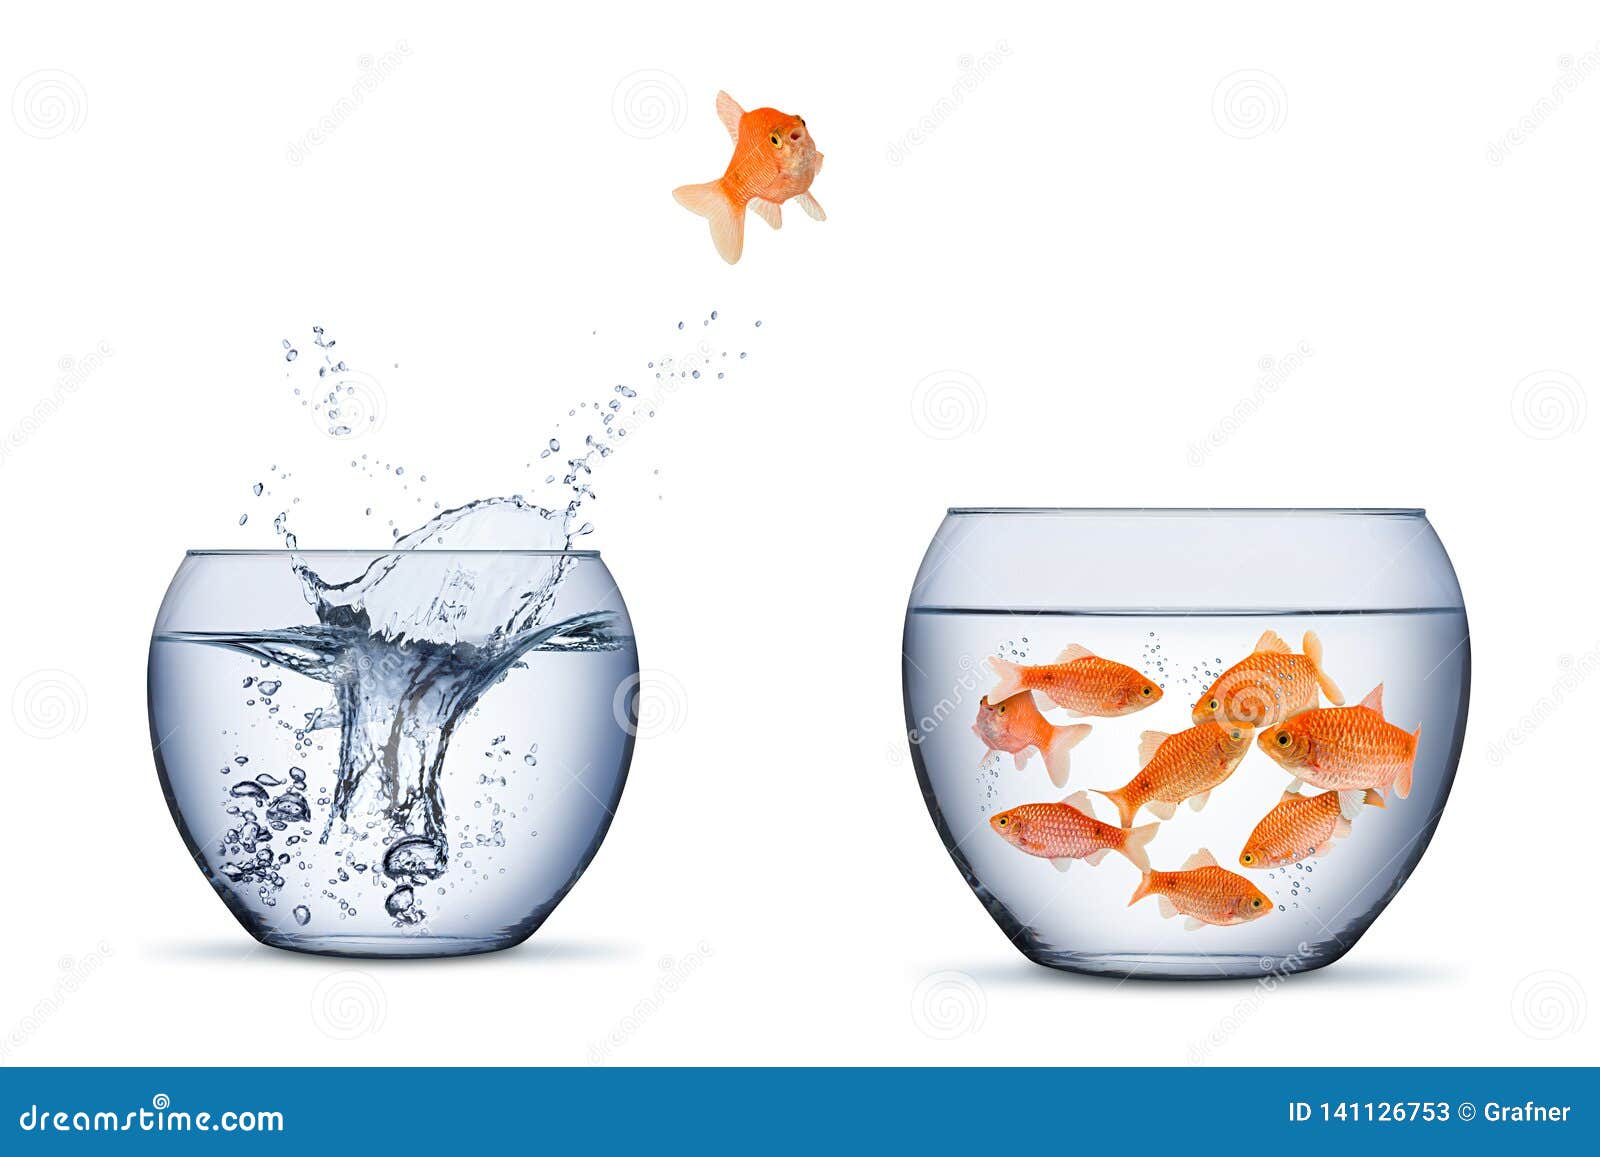 gold fish change move retrun separartion family teamwork concept jump into other bigger bowl  background